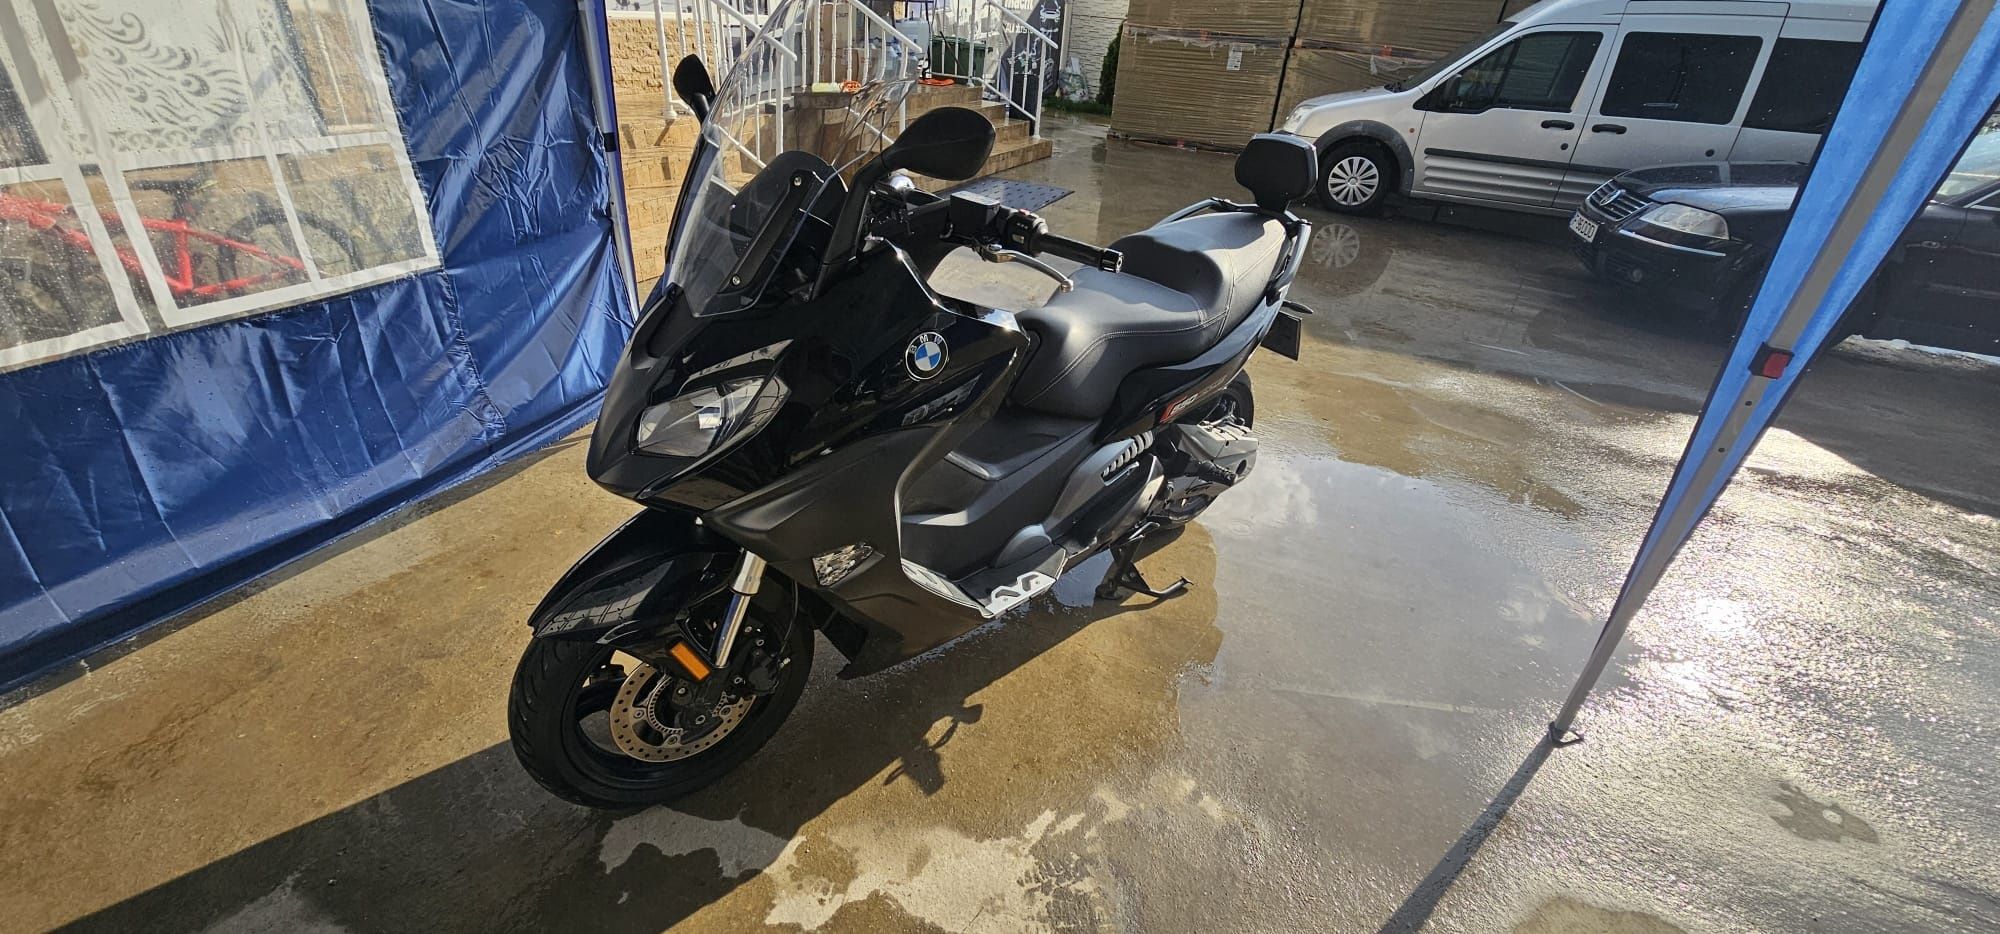 Maxiscooter Bmw C650 sport